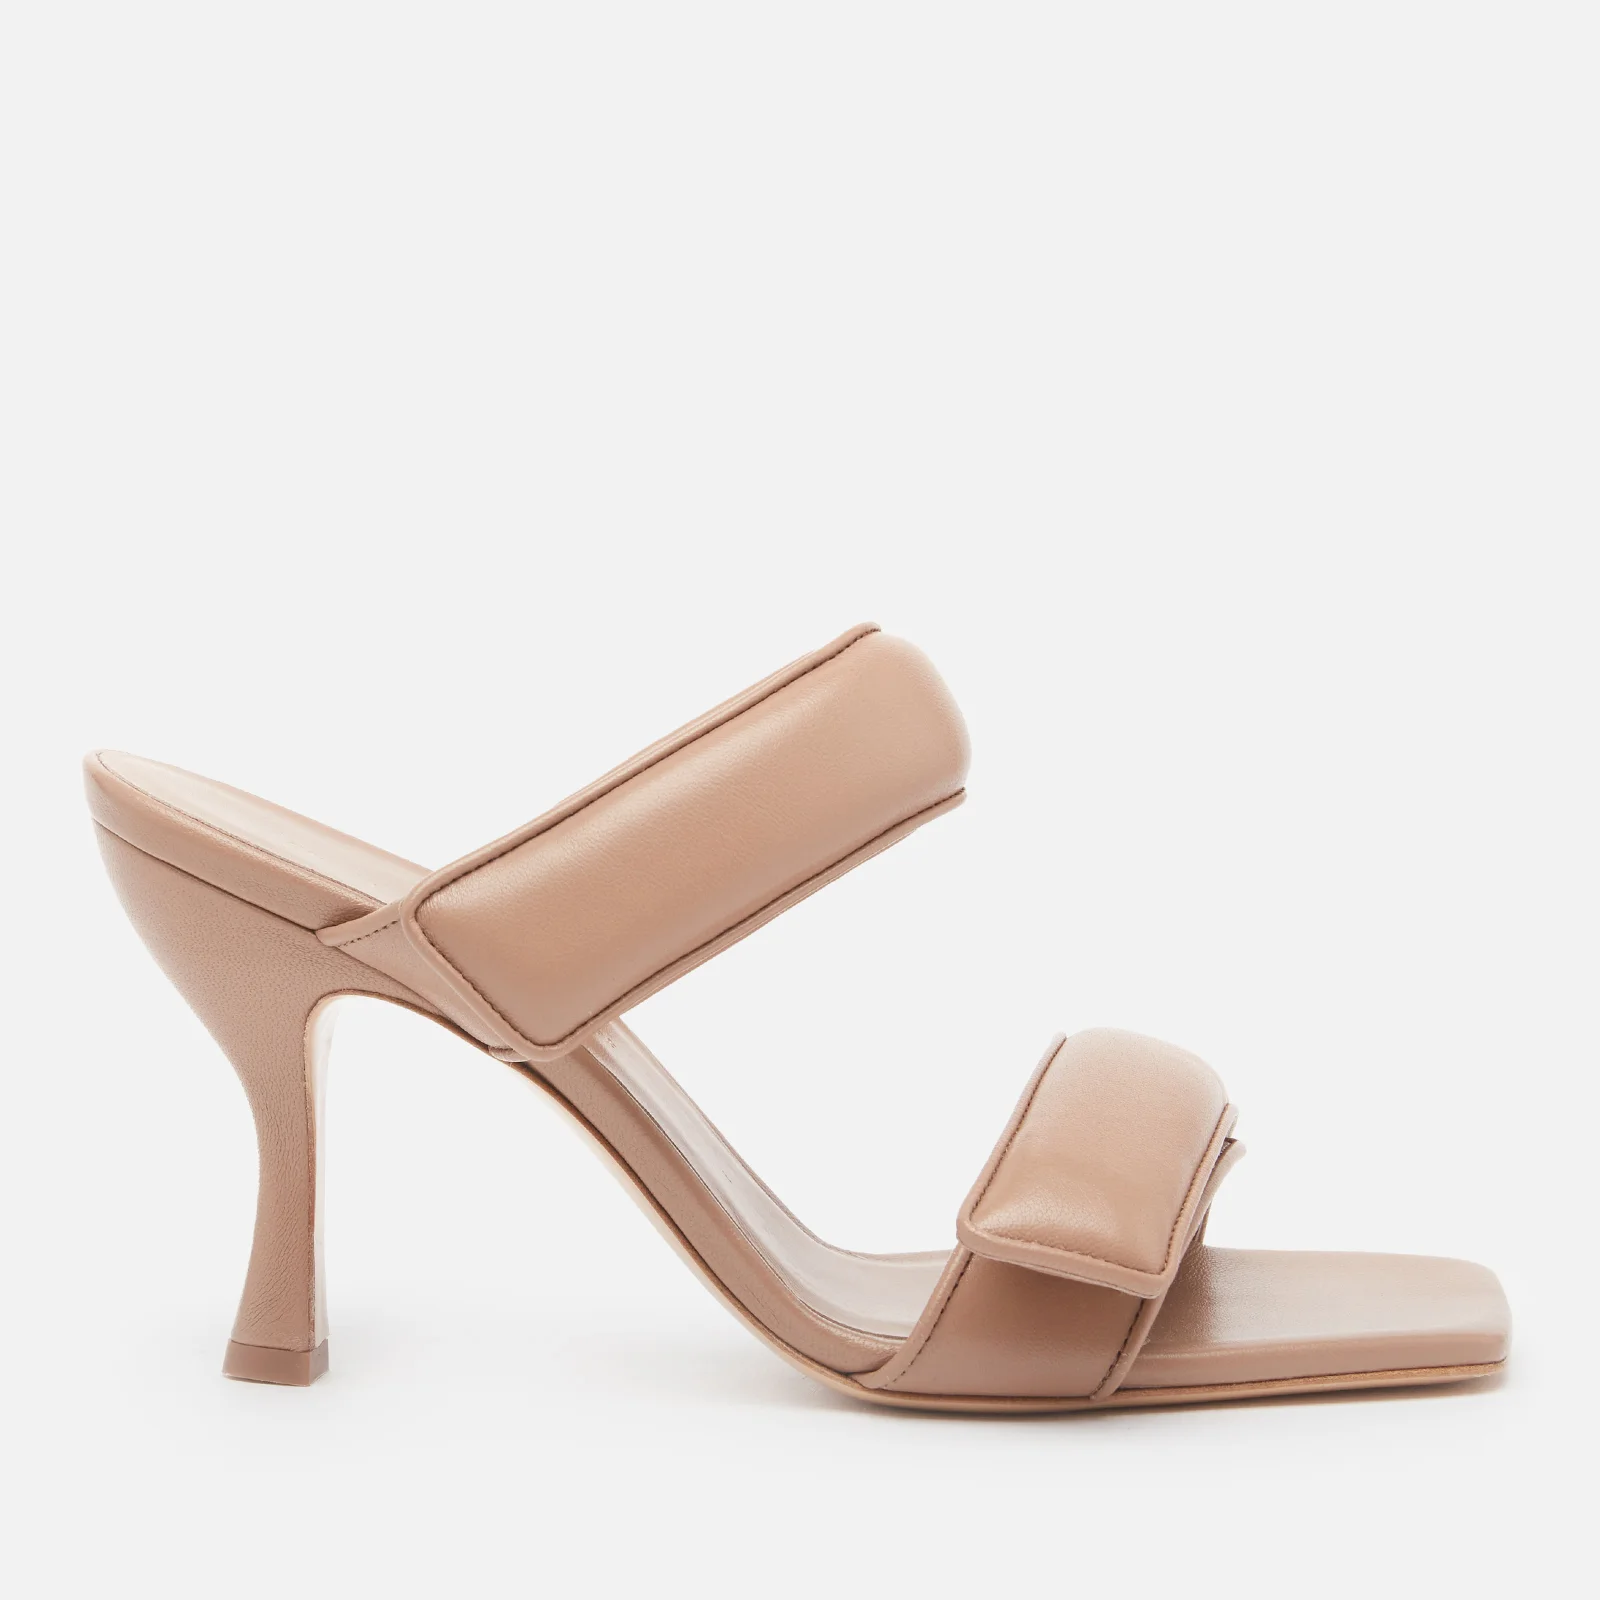 GIA X PERNILLE TEISBAEK Women's Perni 80mm Leather Two Strap Heeled Sandals - Nude Brown Image 1